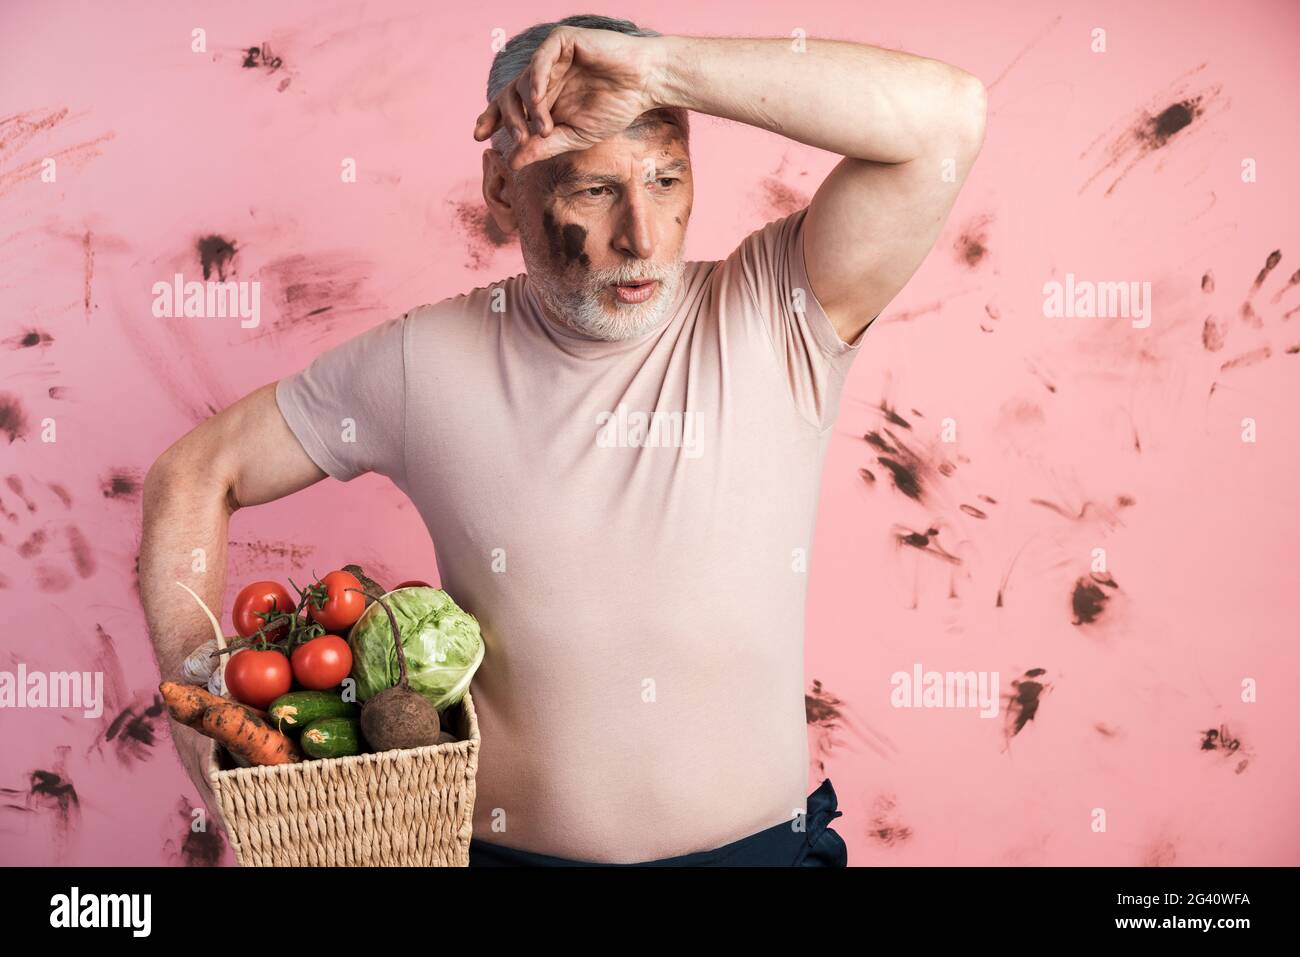 Tired senior man holding a basket with vegetables on a dirty pink background. A man with a stray face after hard work., Tired senior man holding a bas Stock Photo